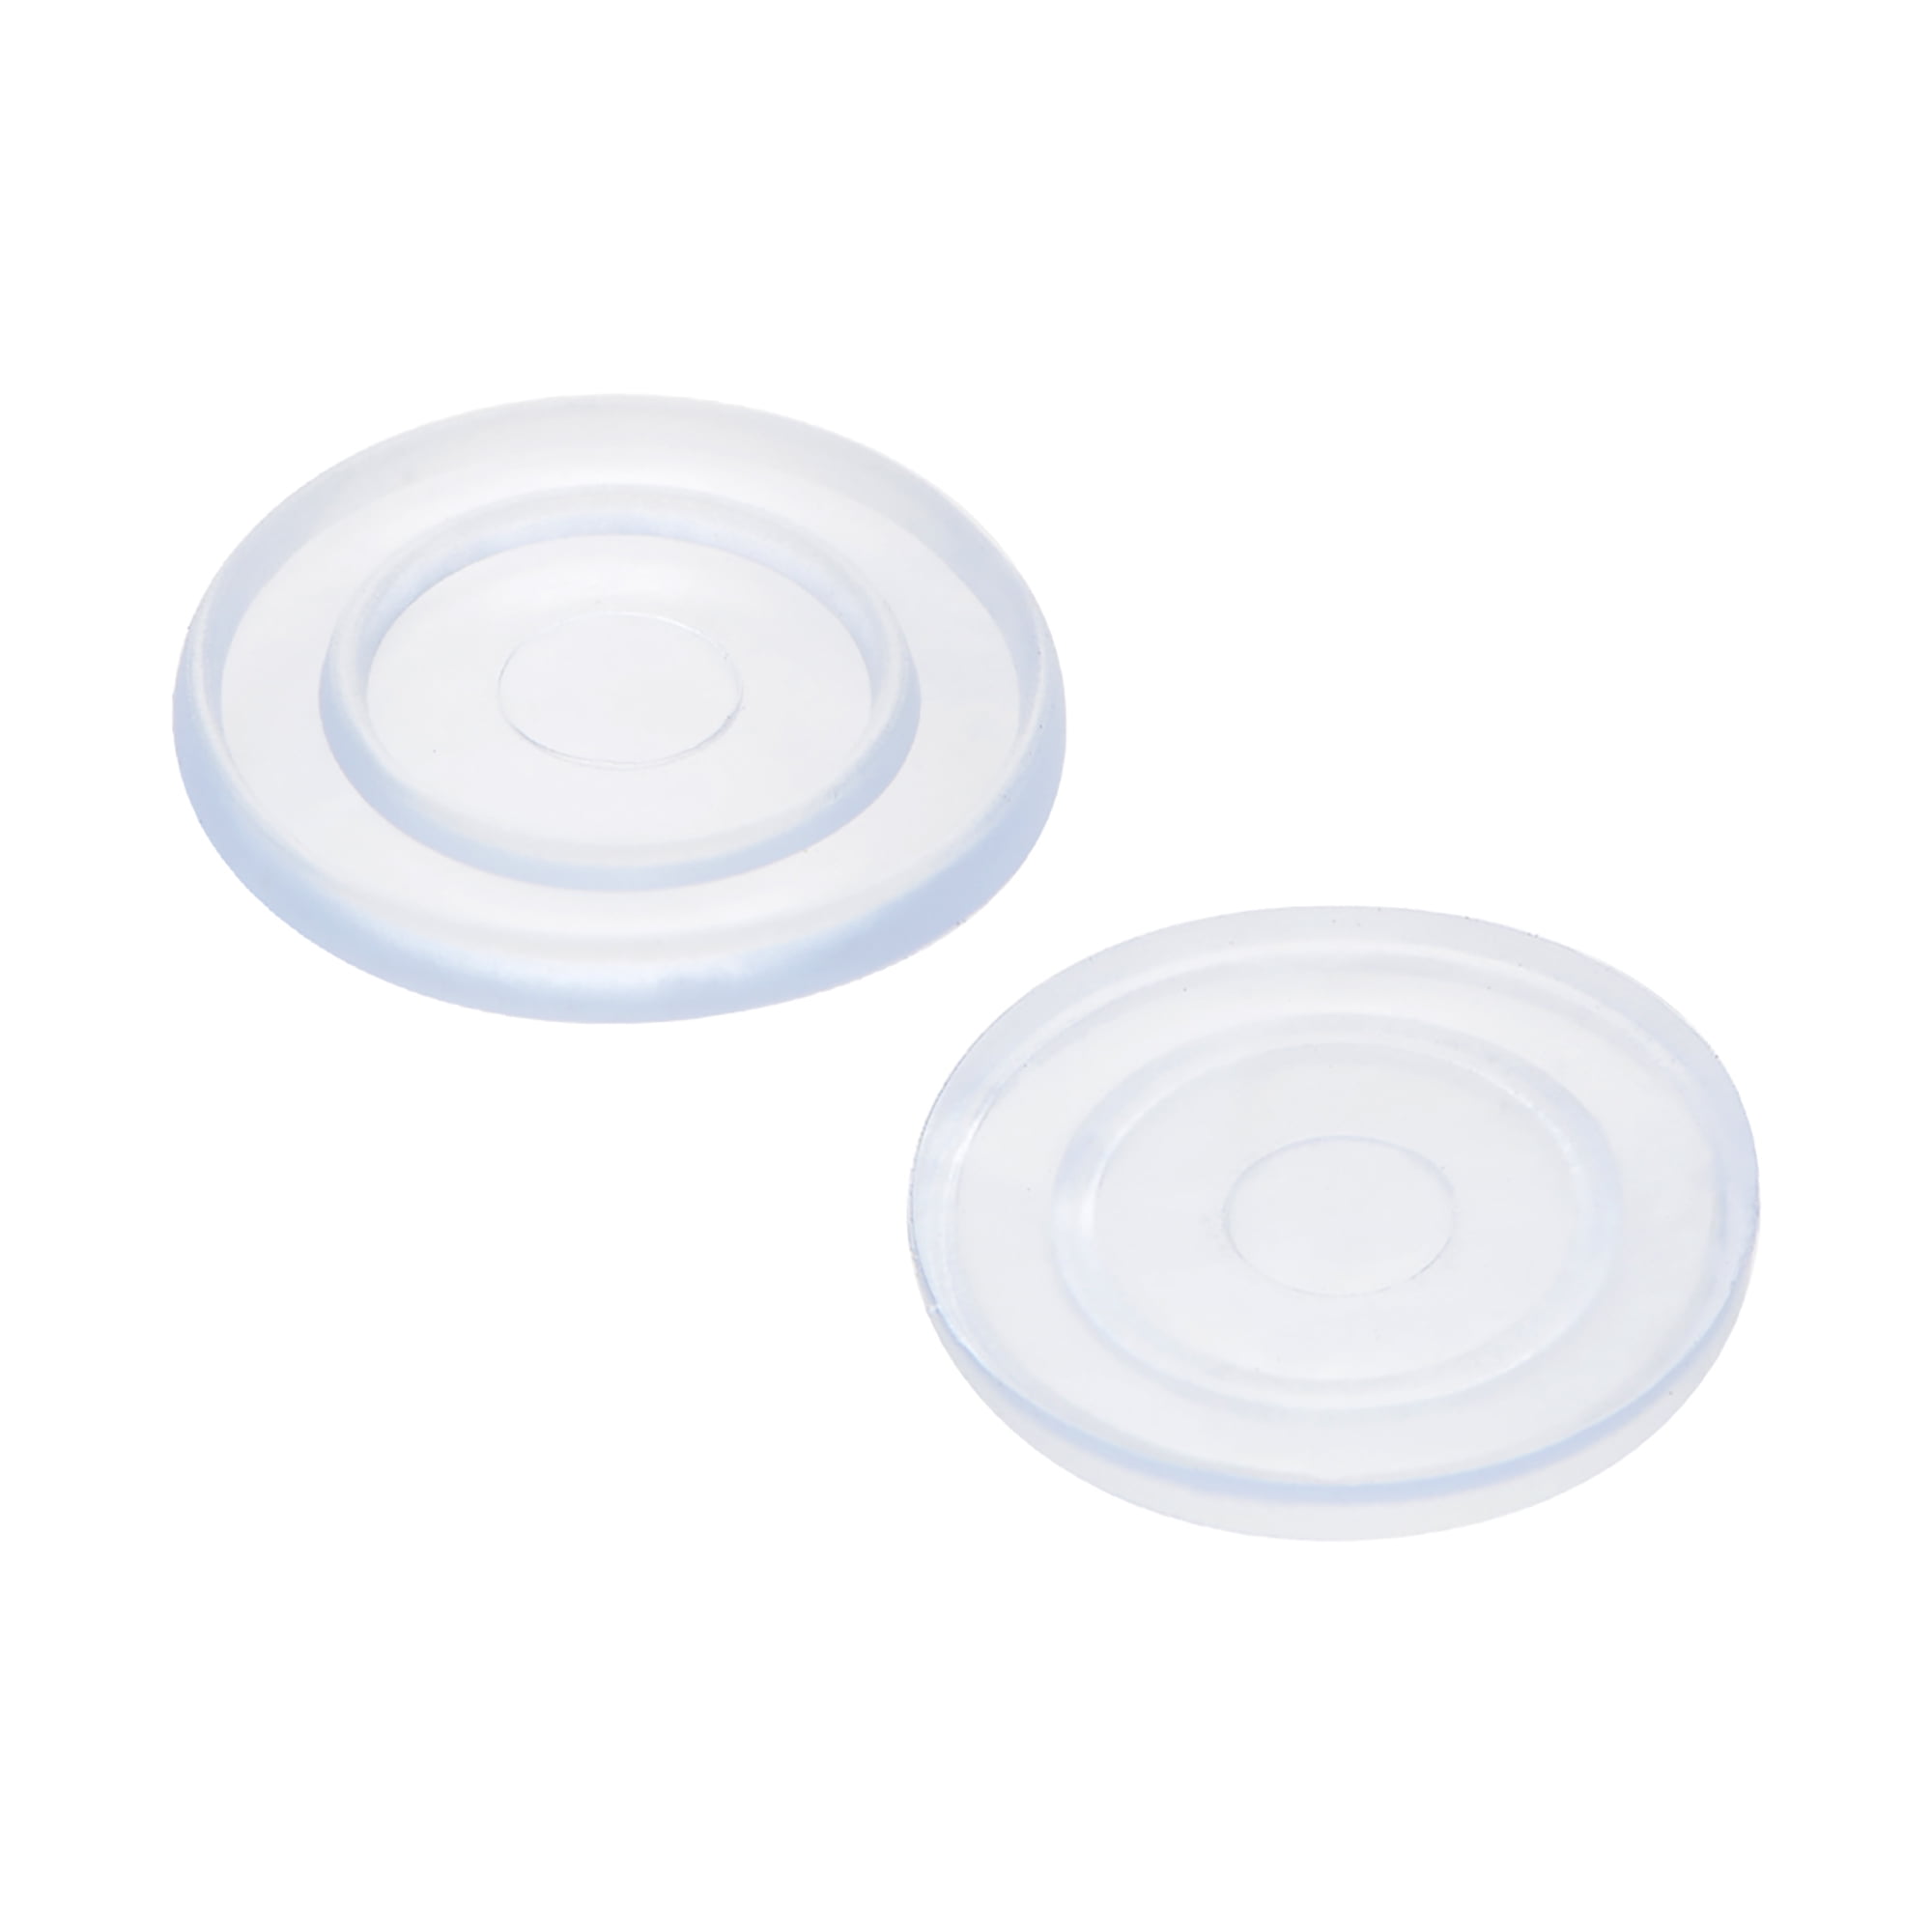 Clear Glass Table Top Buffer，Glass Table Top Bumpers,Soft Material,To Control The Movement Of Glass Plastic Bumper For Table Glass Top Large Glass Top Suction Pad,Glass Top Spacer